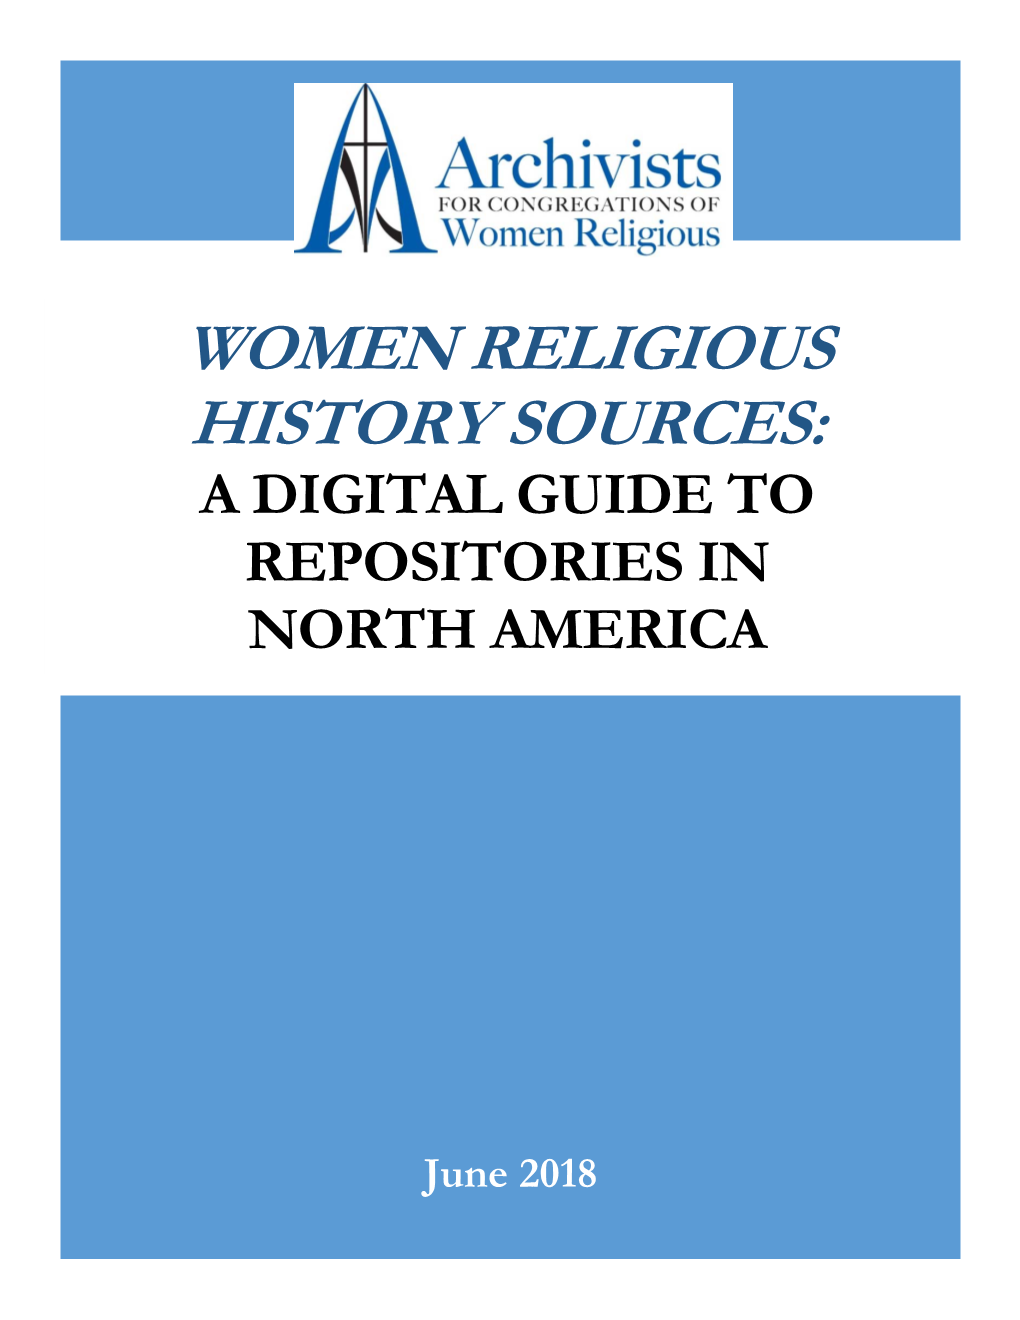 Women Religious History Sources: a Digital Guide to Repositories in North America